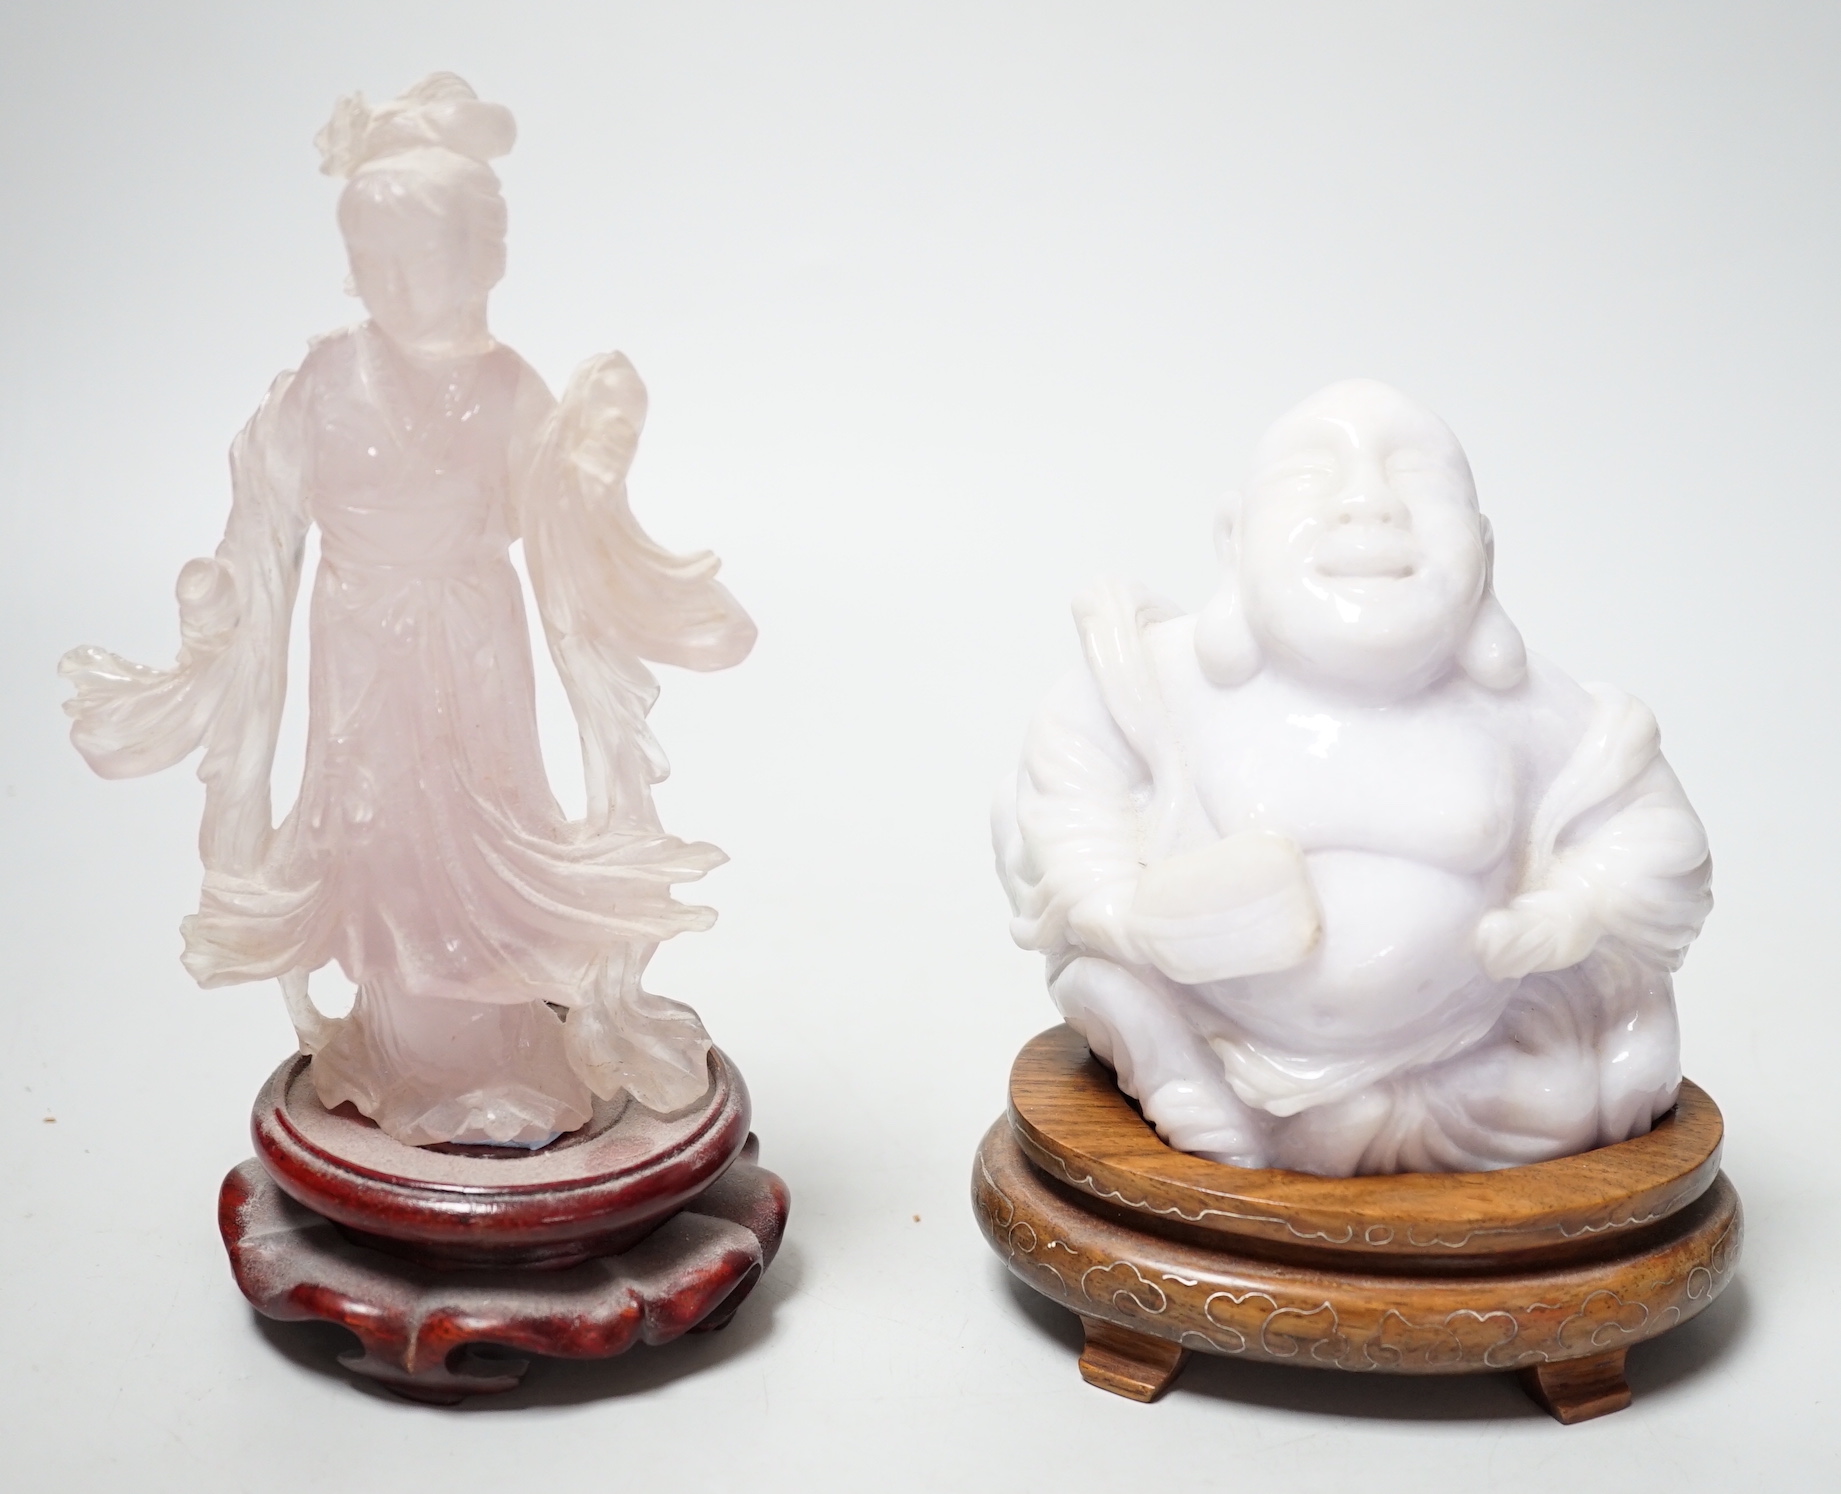 A Chinese jadeite figure of Budai, 11cm high and a rose quartz figure of a lady, wood stands